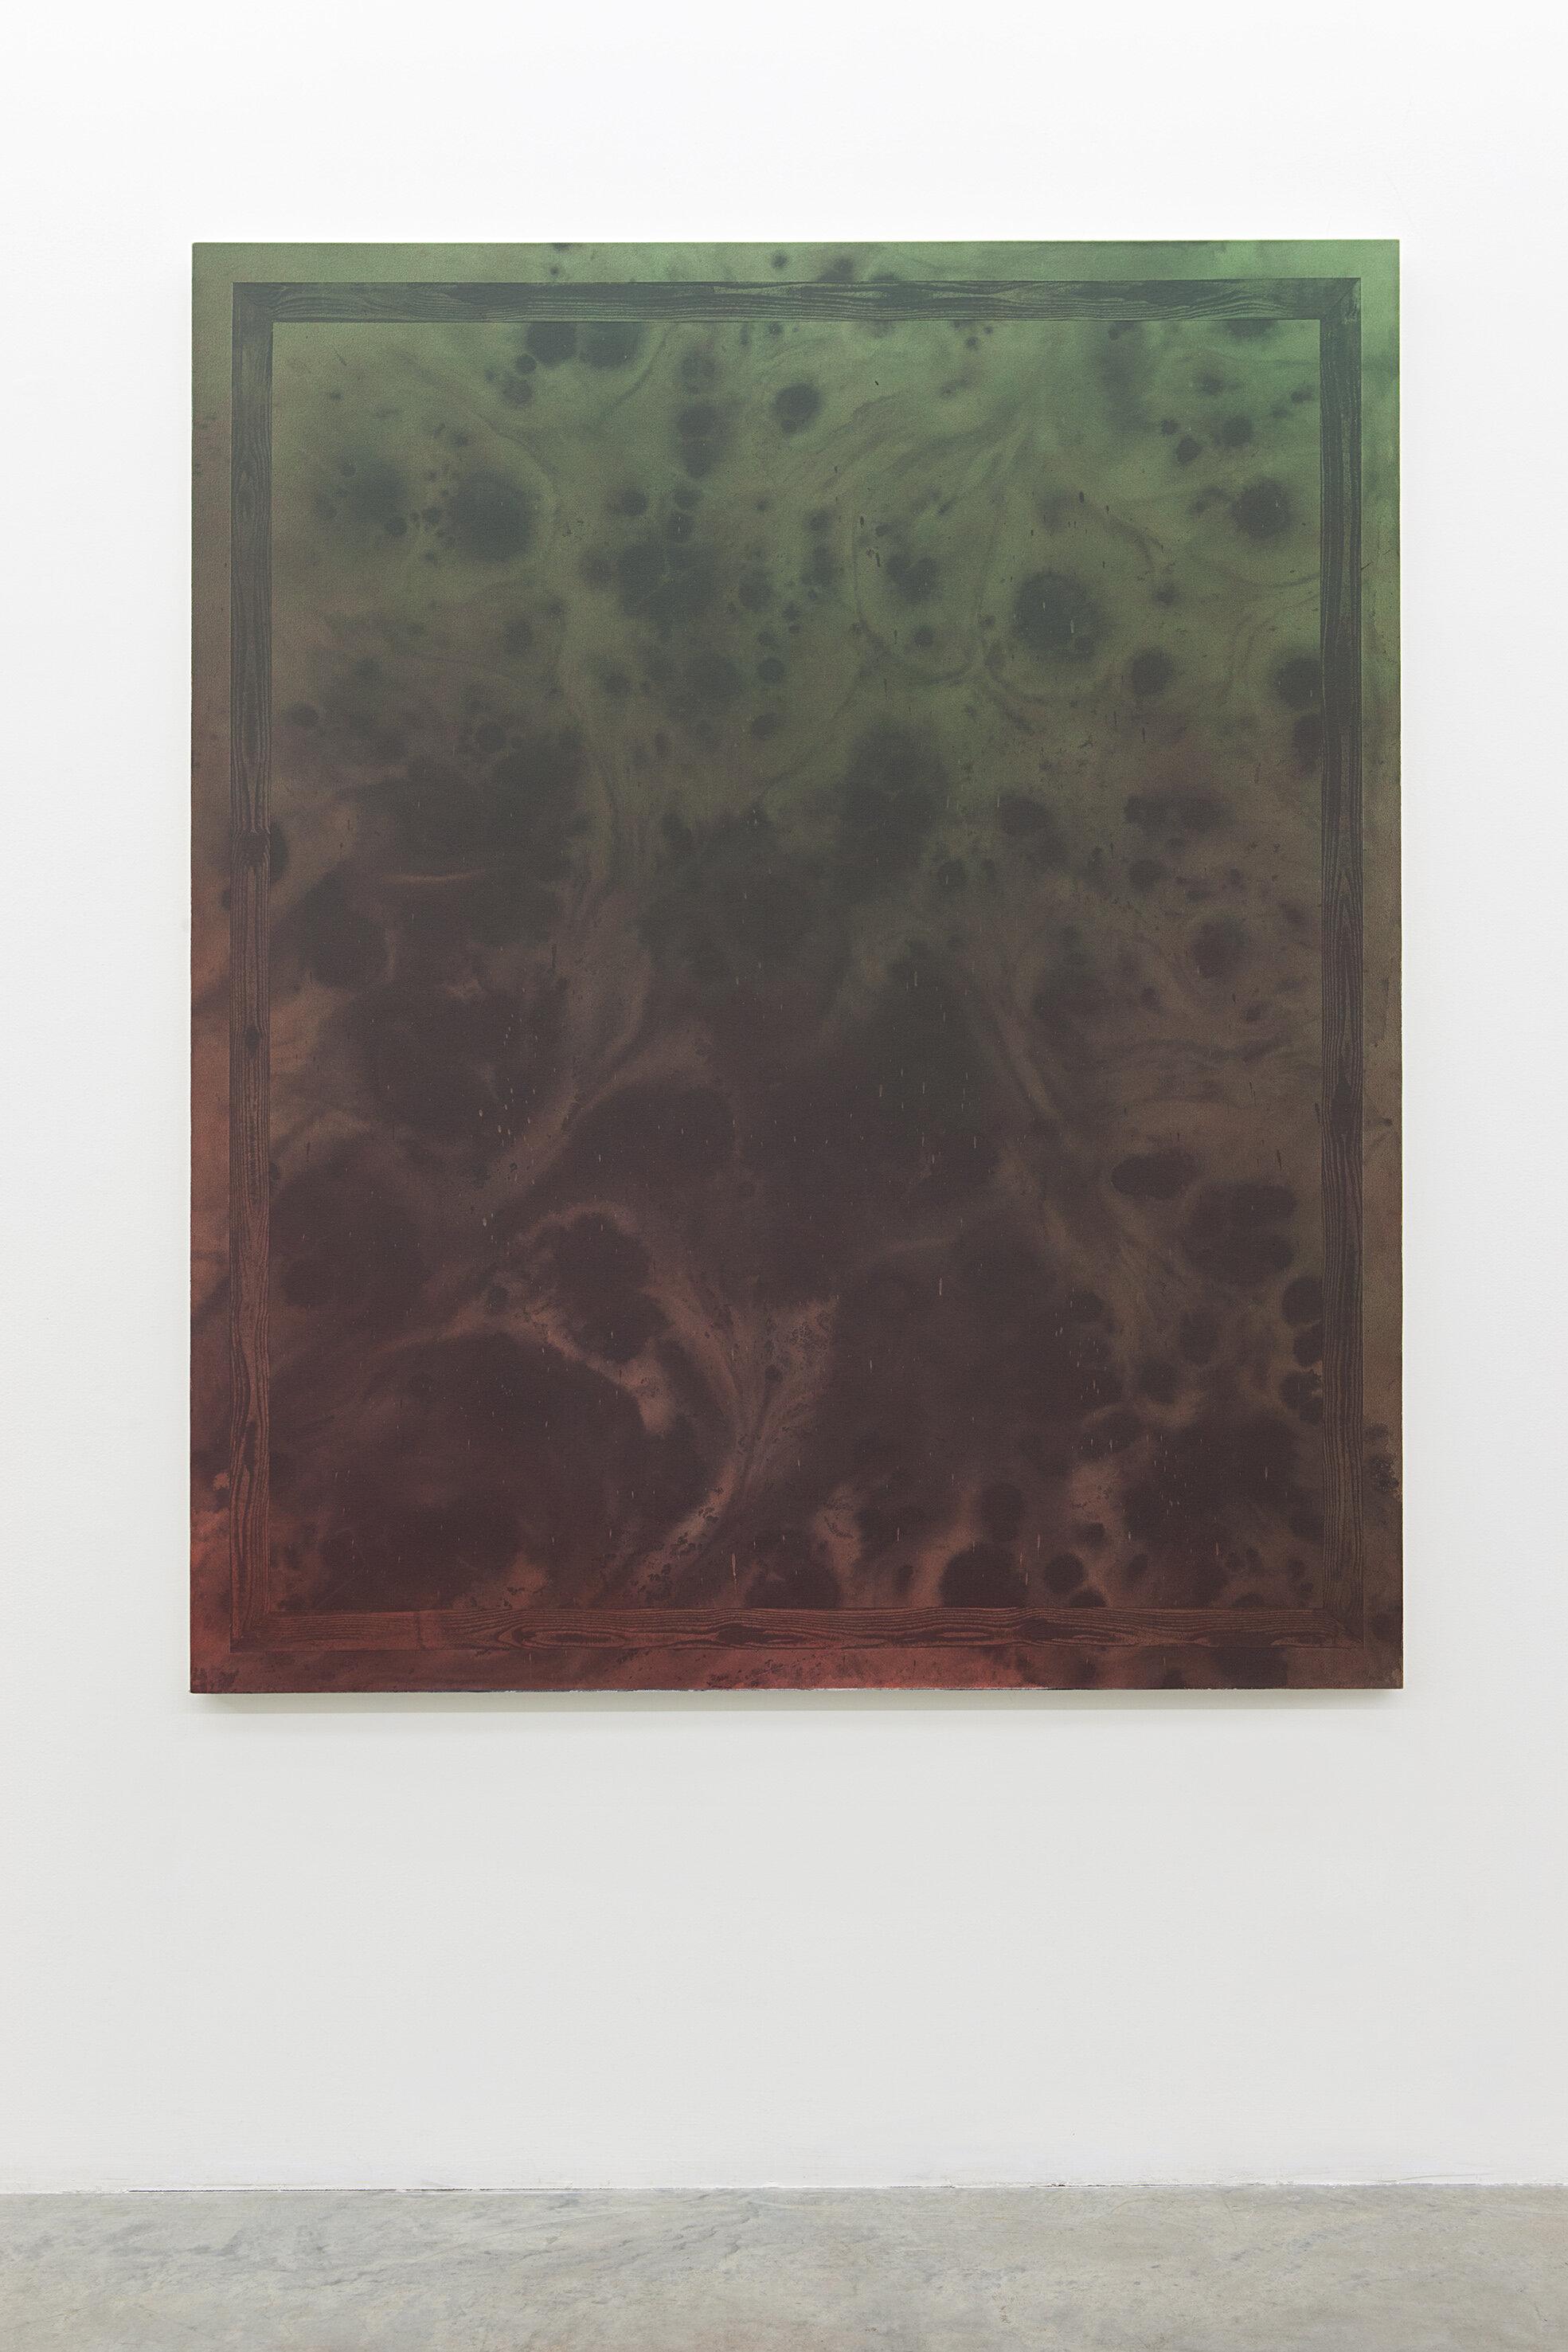   Untitled Painting in Red Over Green w/ Painted Faux Wood Grain Frame,  2014. Acrylic on canvas. 72 x 60 inches 